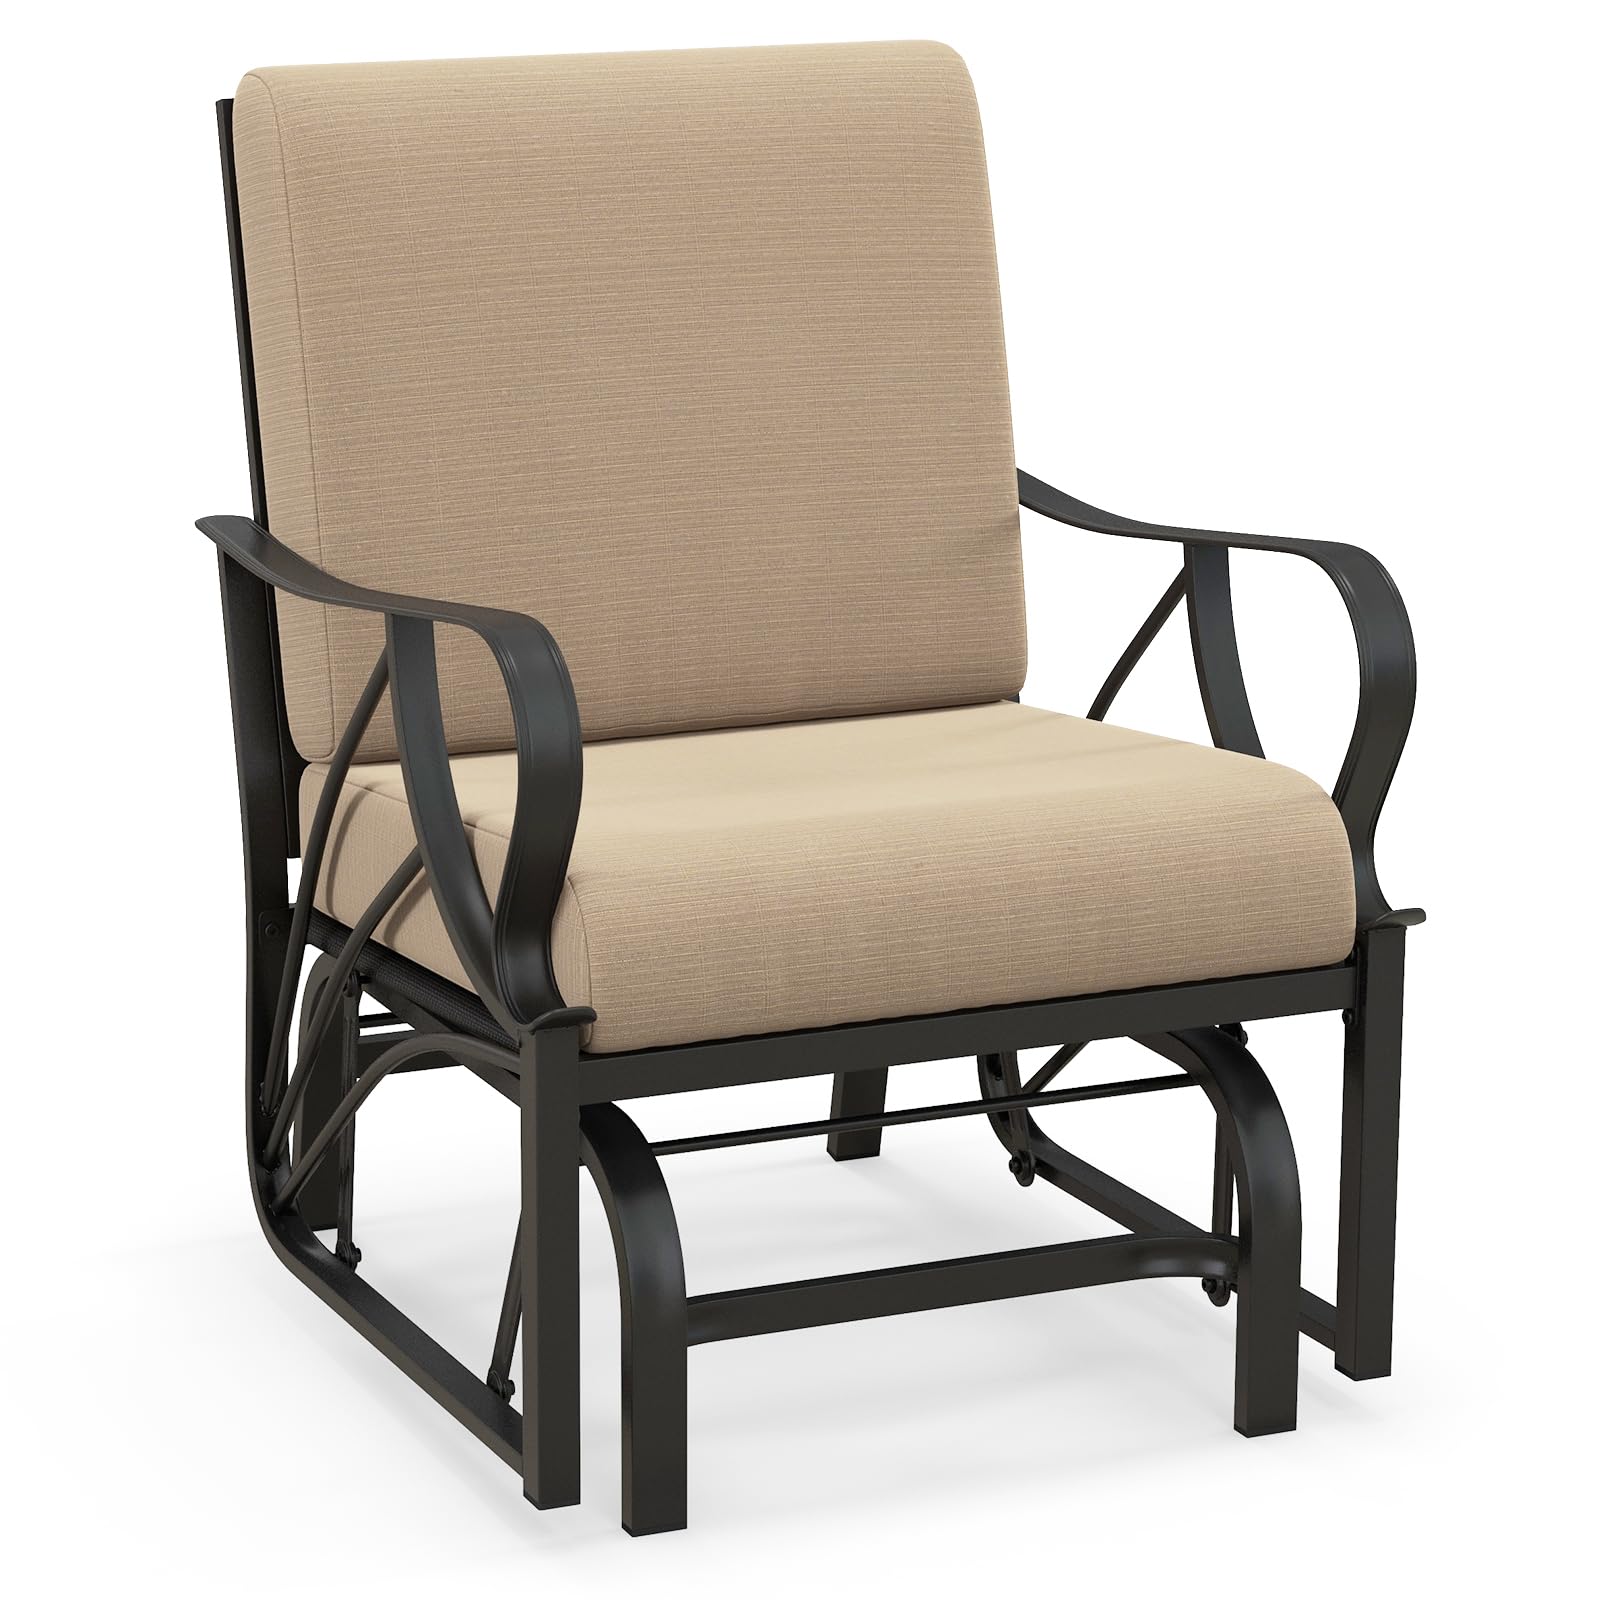 Giantex Patio Glider Outdoor Chair - Outside Rocking Chair with Thick Cushion, Sprayed Metal Frame